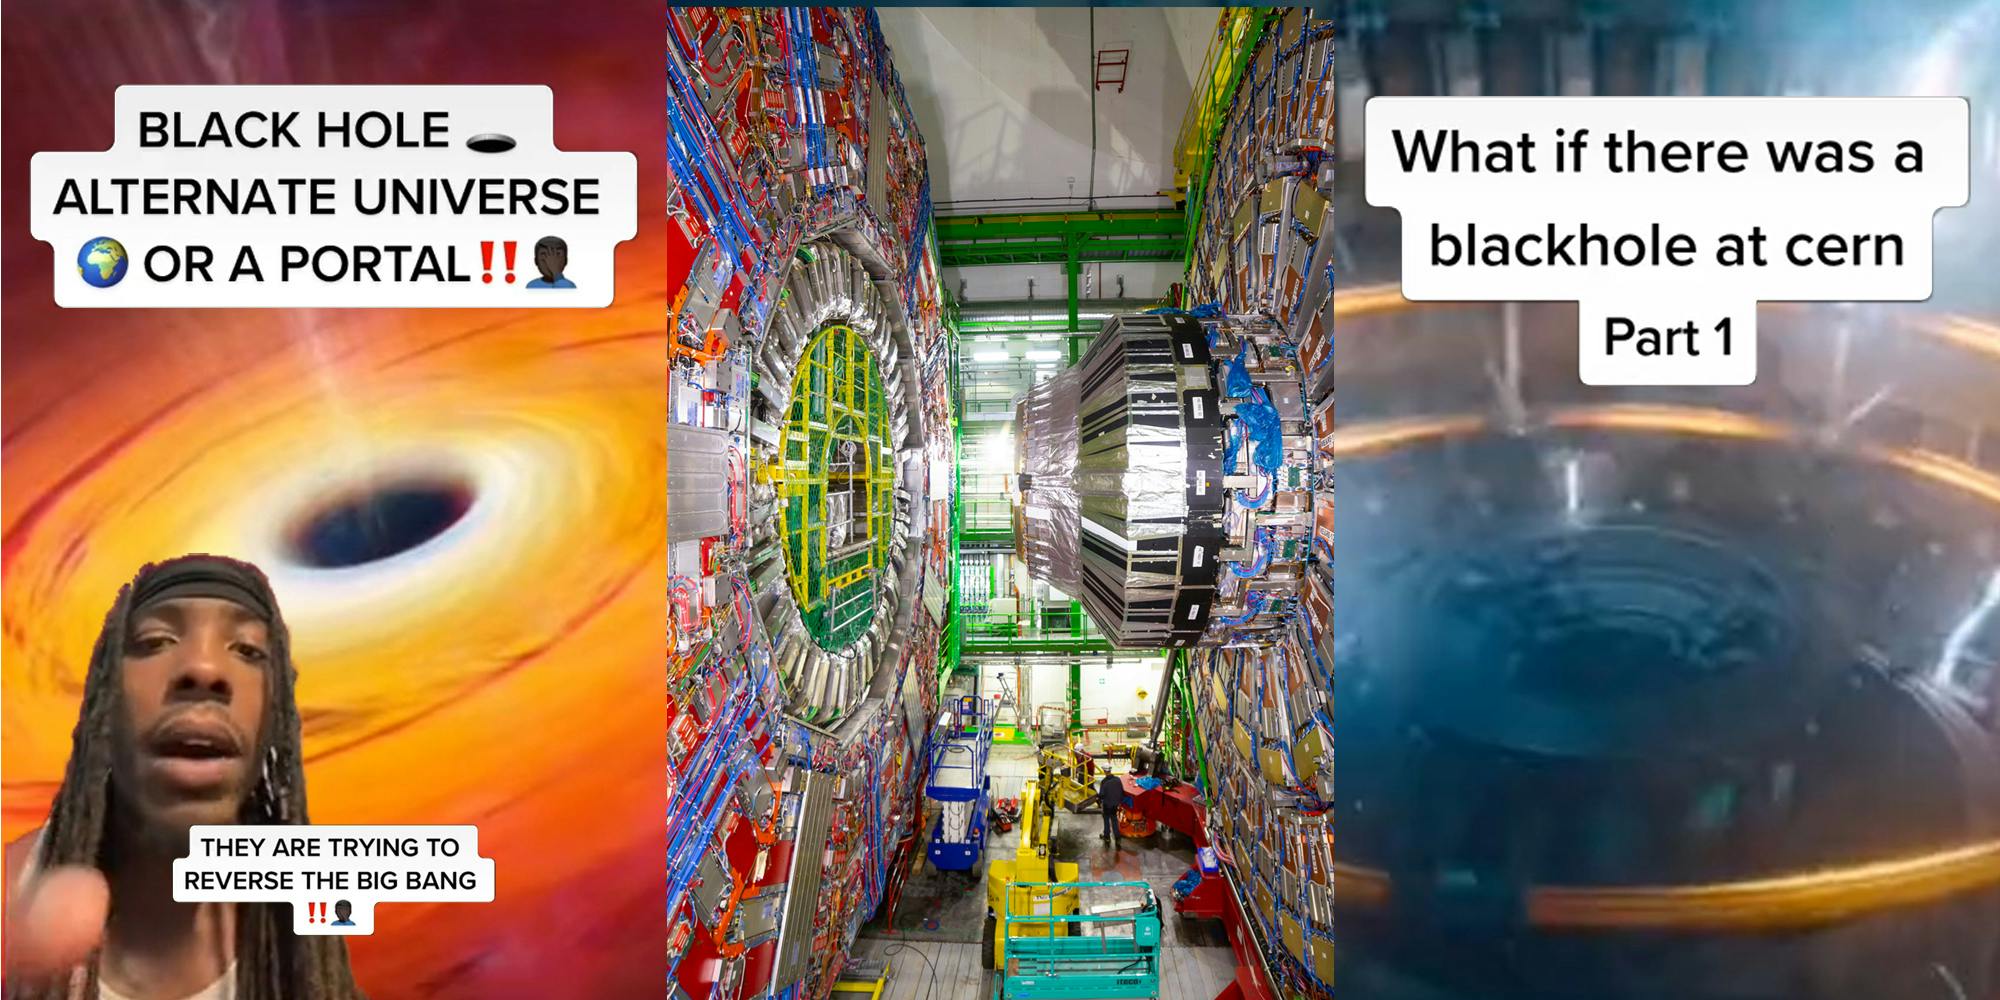 man greenscreen tiktok over image of black hole caption "BLACK HOLE ALTERNATE UNIVERSE OR A PORTAL!! THEY ARE TRYING TO REVERSE THE BIG BANG!!" (l) CERN LHC (c) Hadron Collider movie clip background caption "What if there was a black hole at cern Part 1" (r)